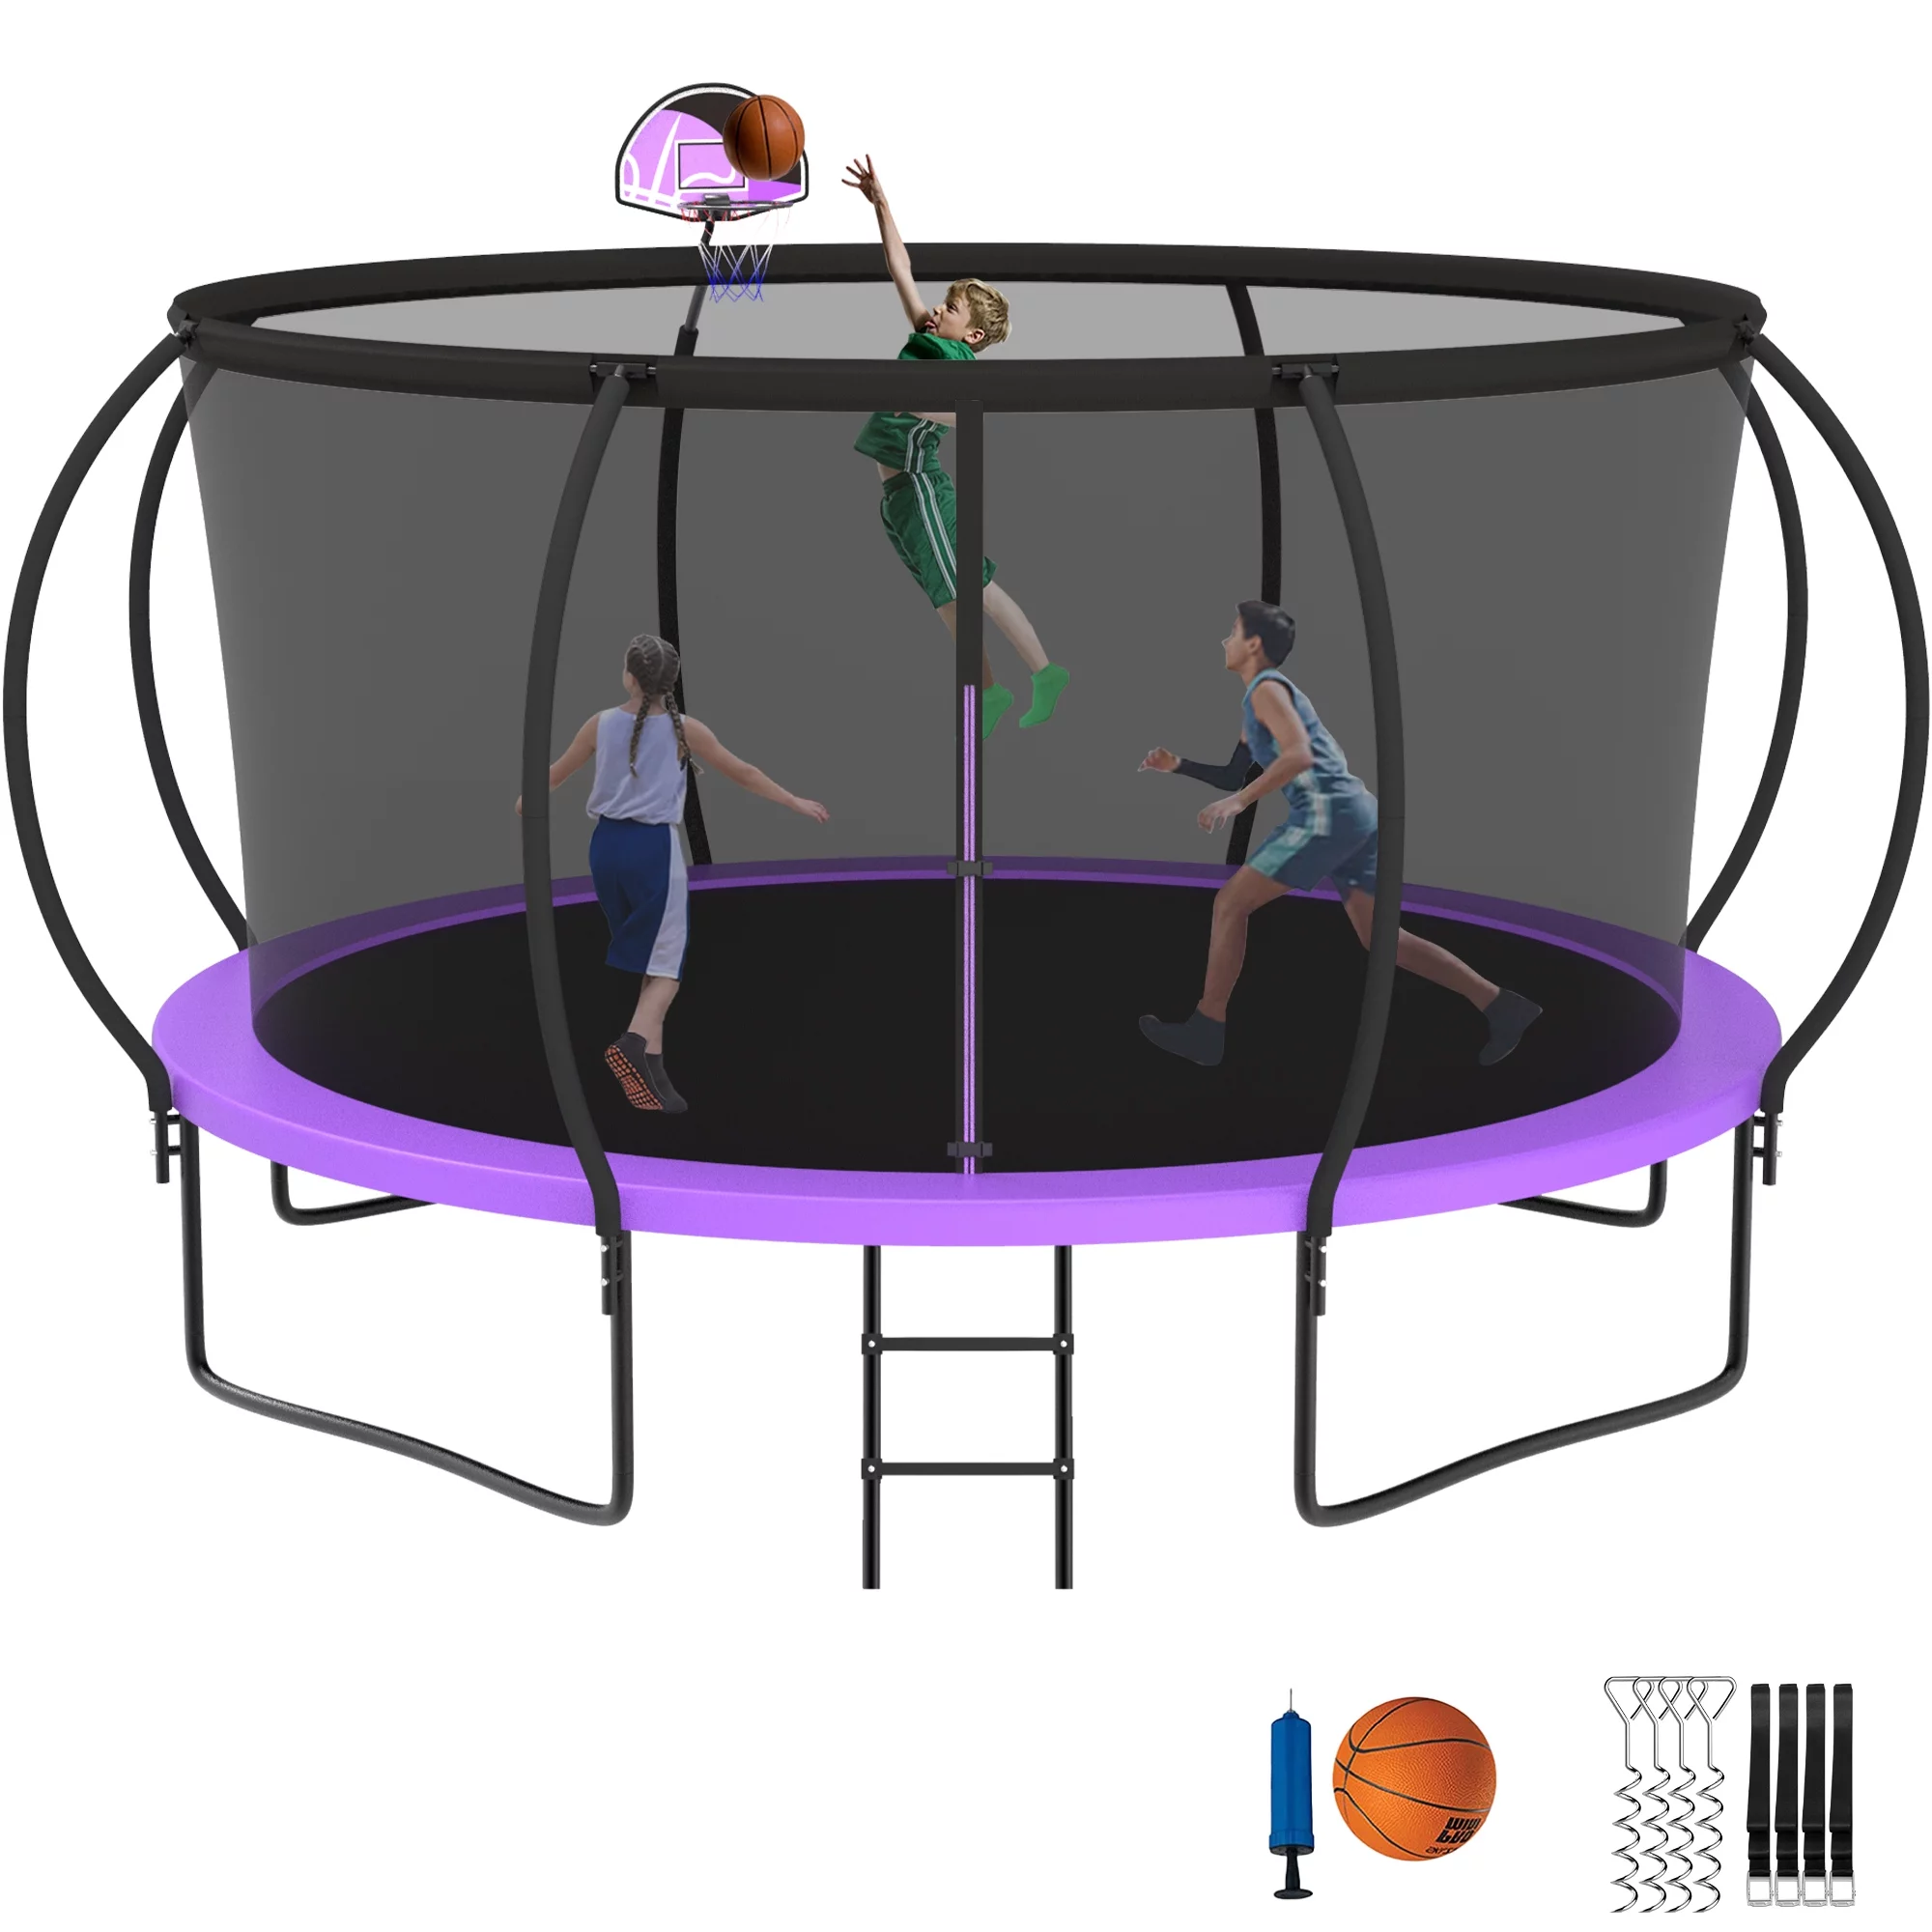 Jump Into Fun Trampoline 12 14 15 16FT for Kids/Adults, Trampoline with Enclosure, Basketball Hoop, Wind Stakes, 1200LBS Capacity for 2-3 Adults and 5-6 Kids, Outdoor Round Trampoline, Purple